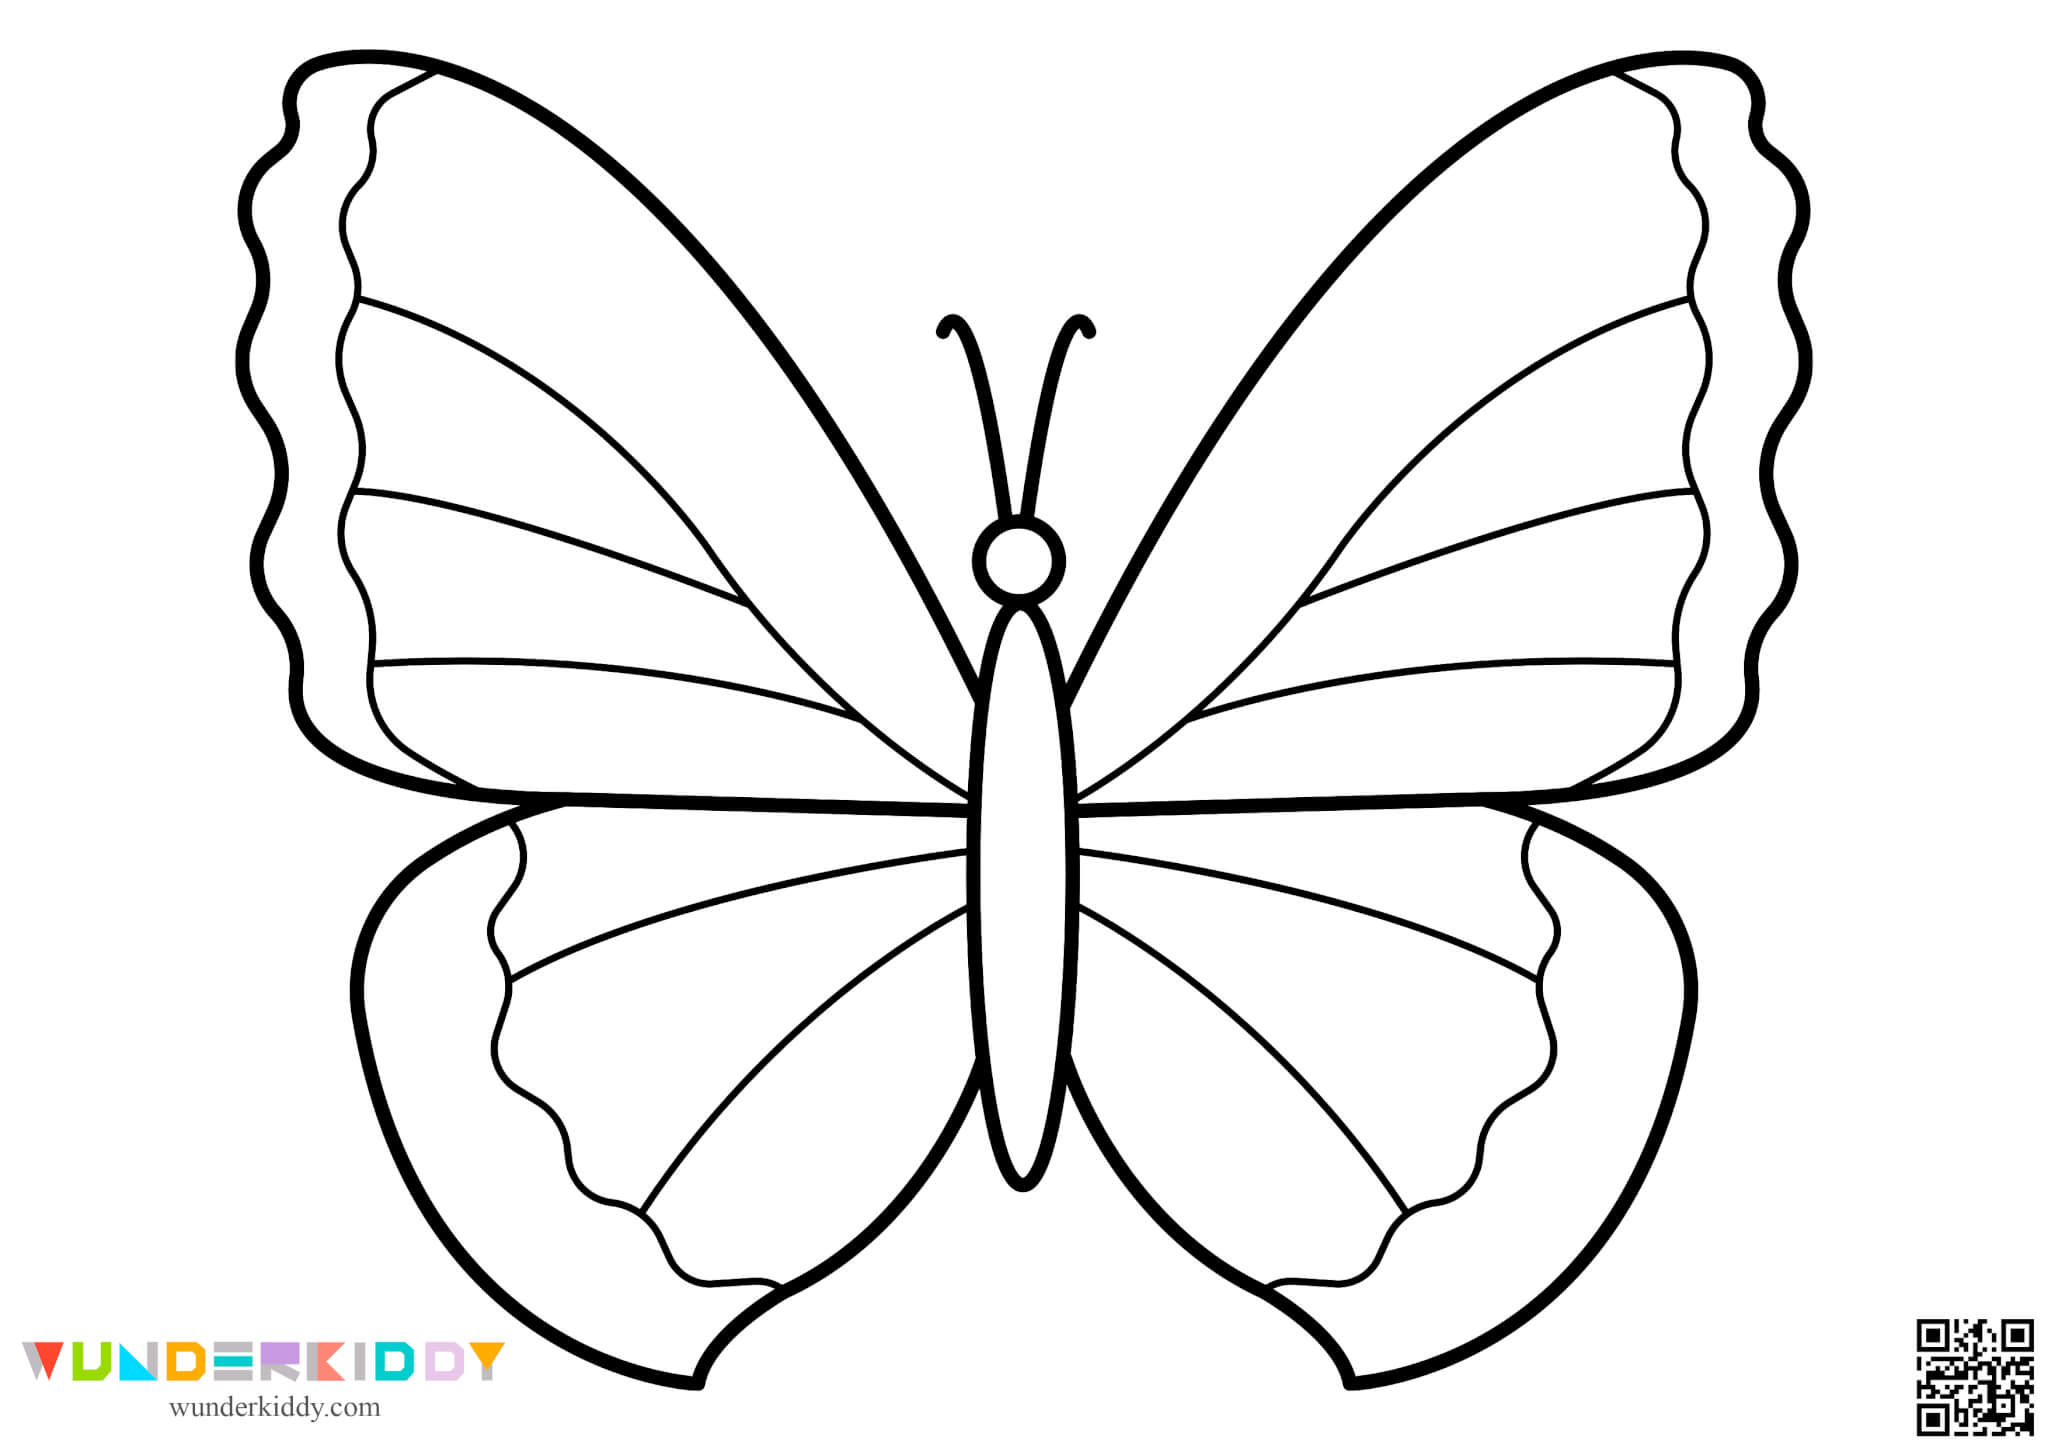 Butterfly Template Printable - Image 5